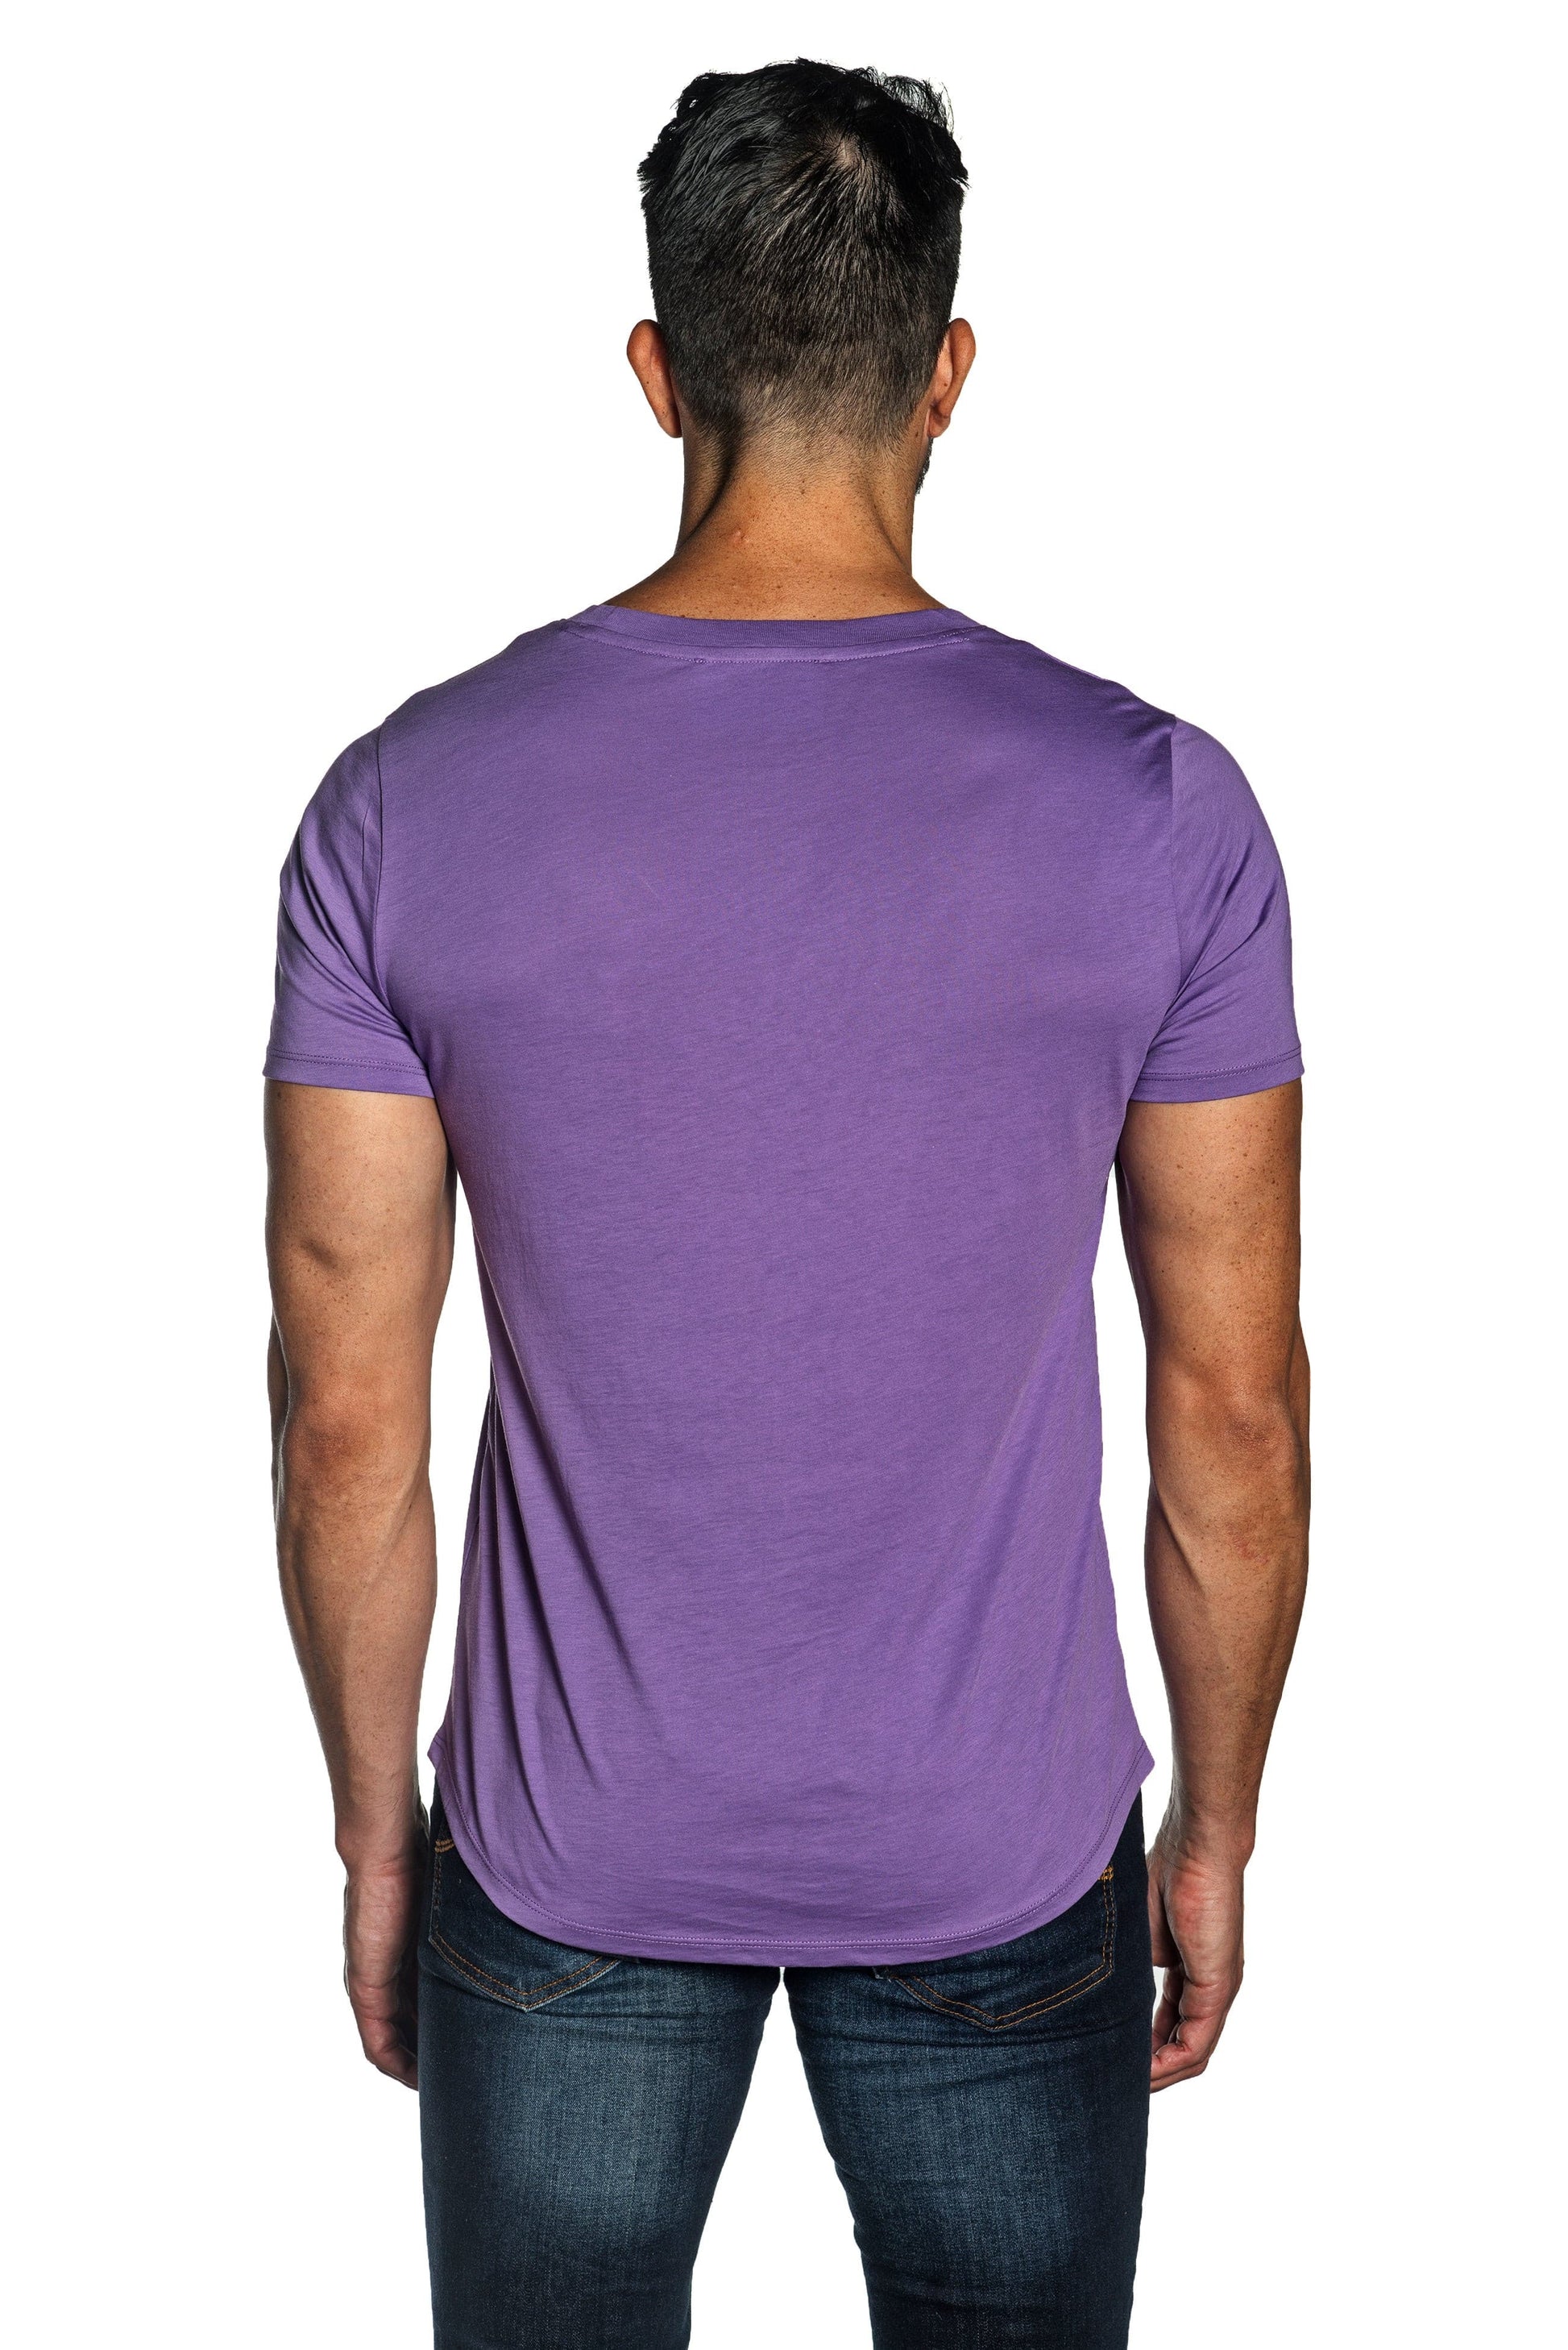 Purple Mens Tee With Star Embroidery TEE-24.